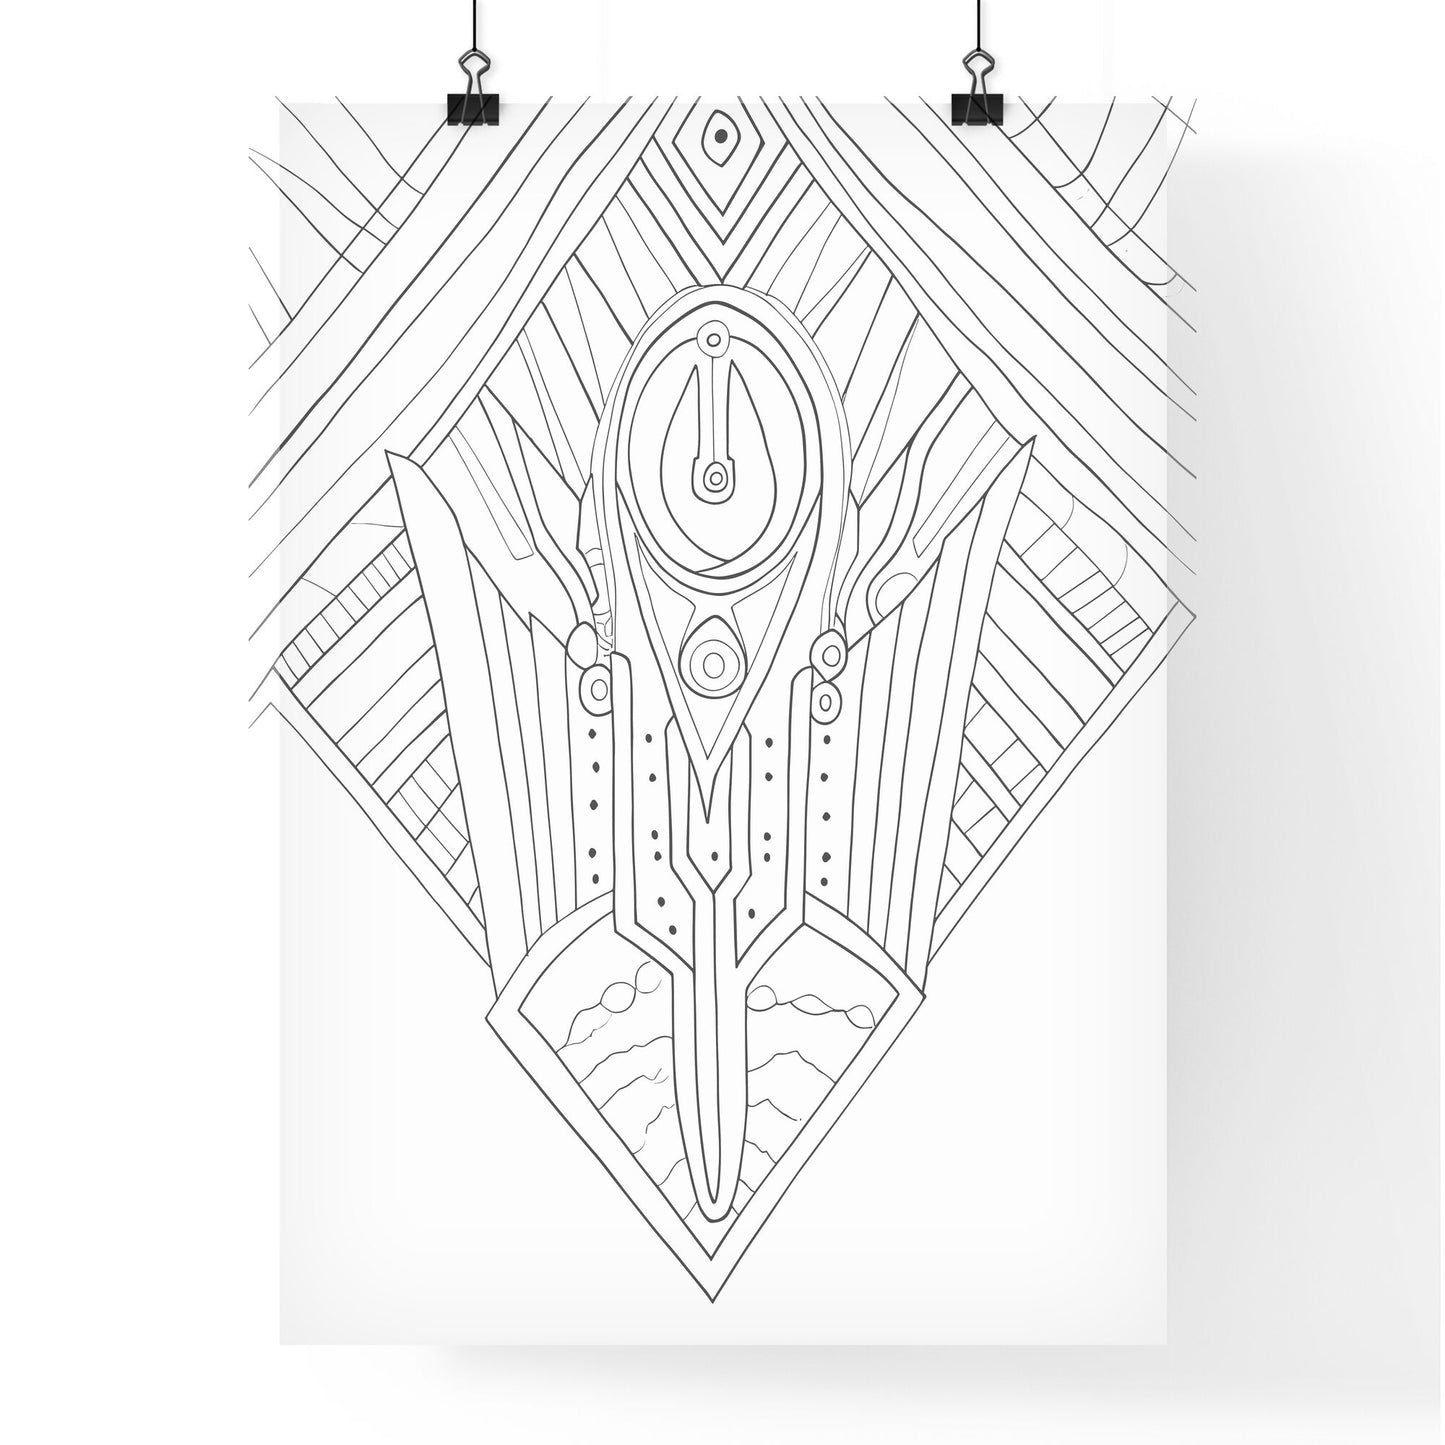 Hamsa Hands Poster - A Black And White Drawing Of A Design Default Title